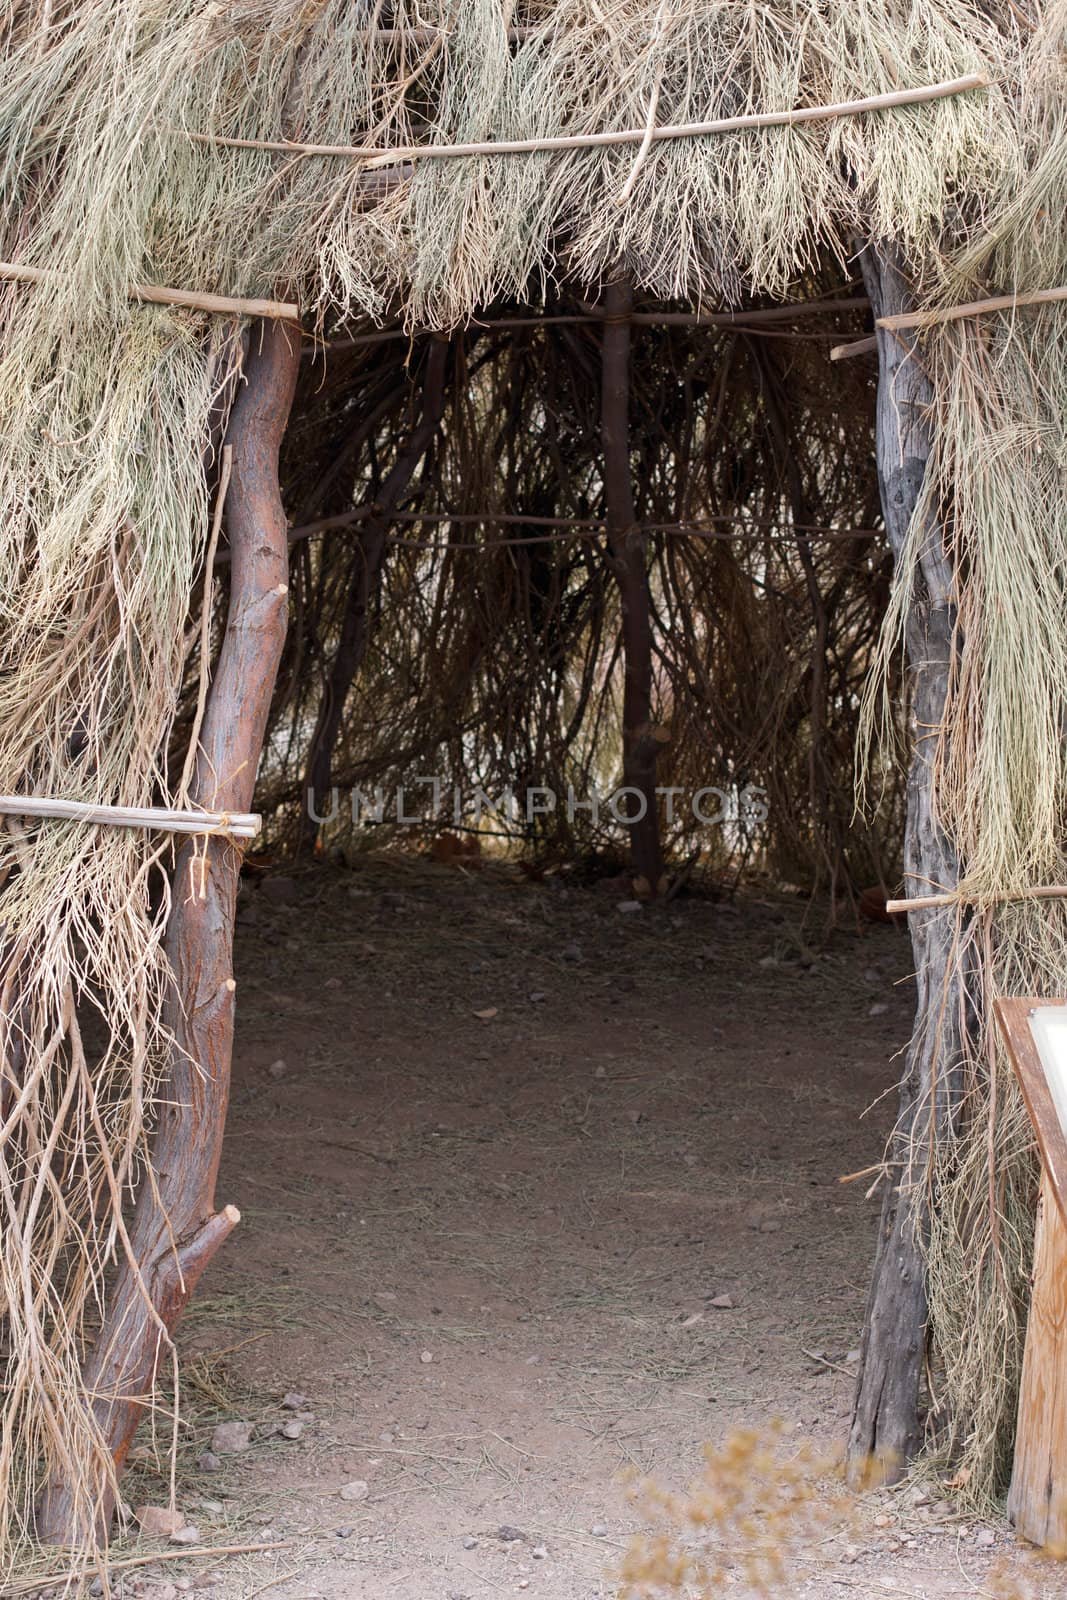 Tee Pee entrance native american made out of branches